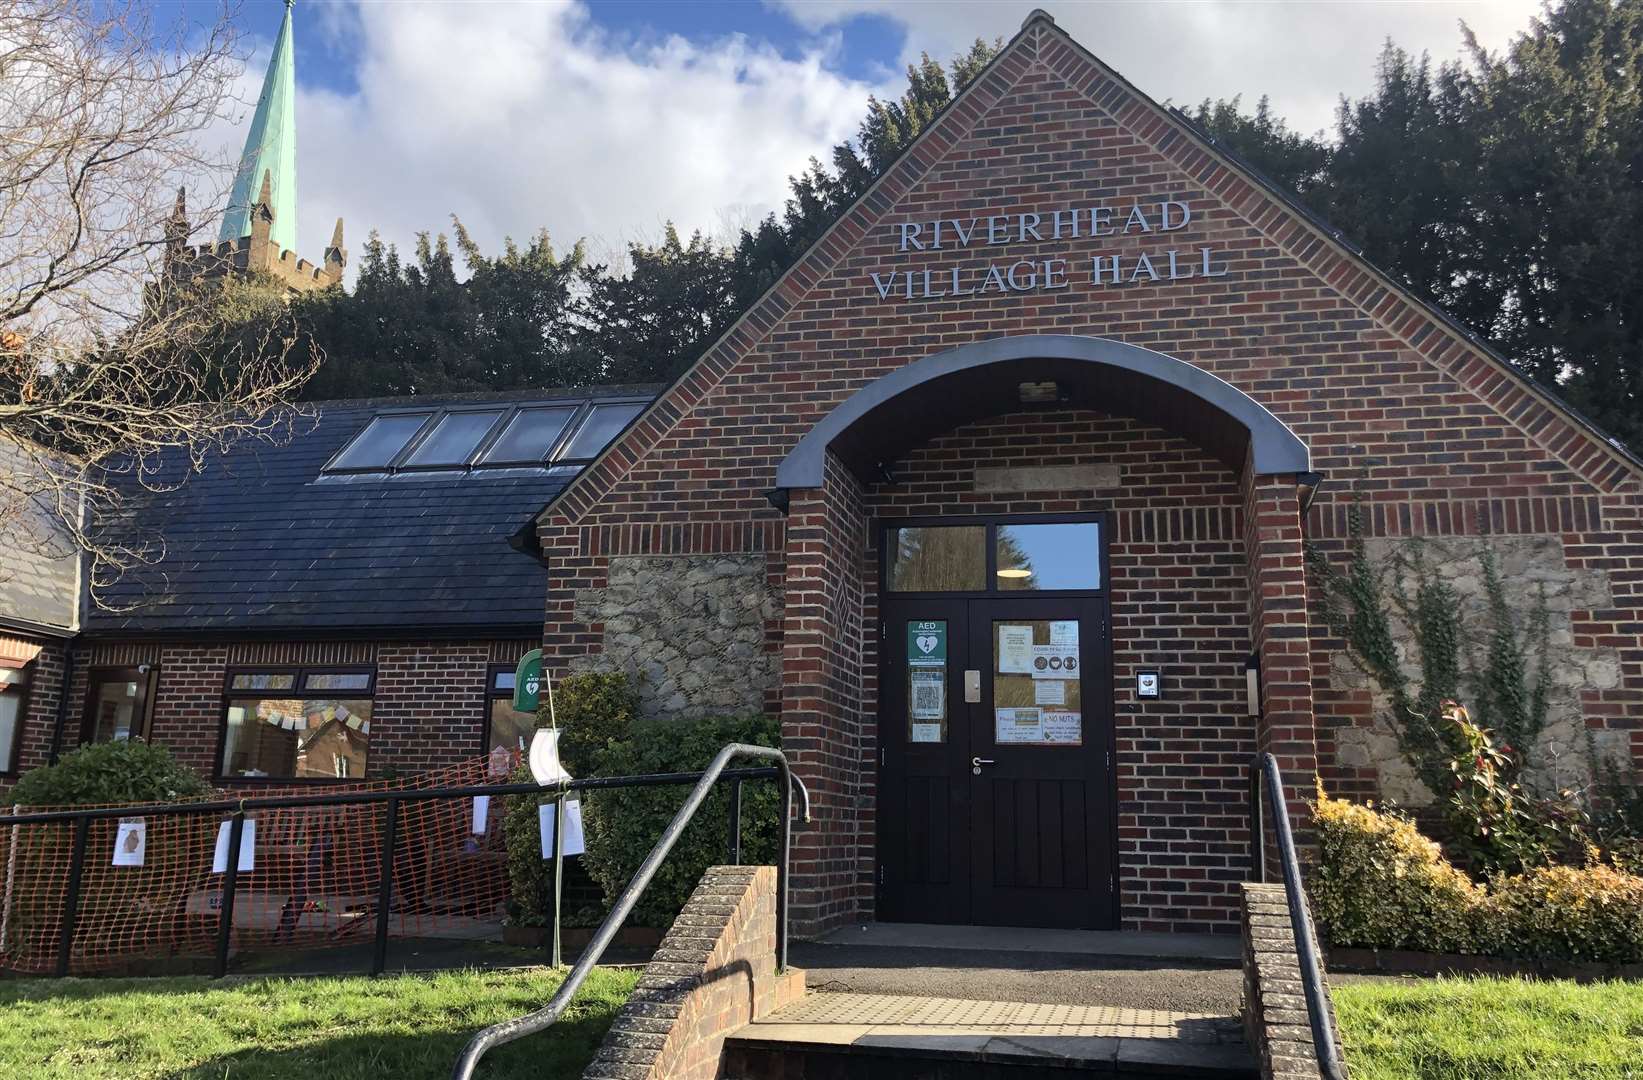 St Mary's Pre School is a registered charity based in Riverhead Village hall